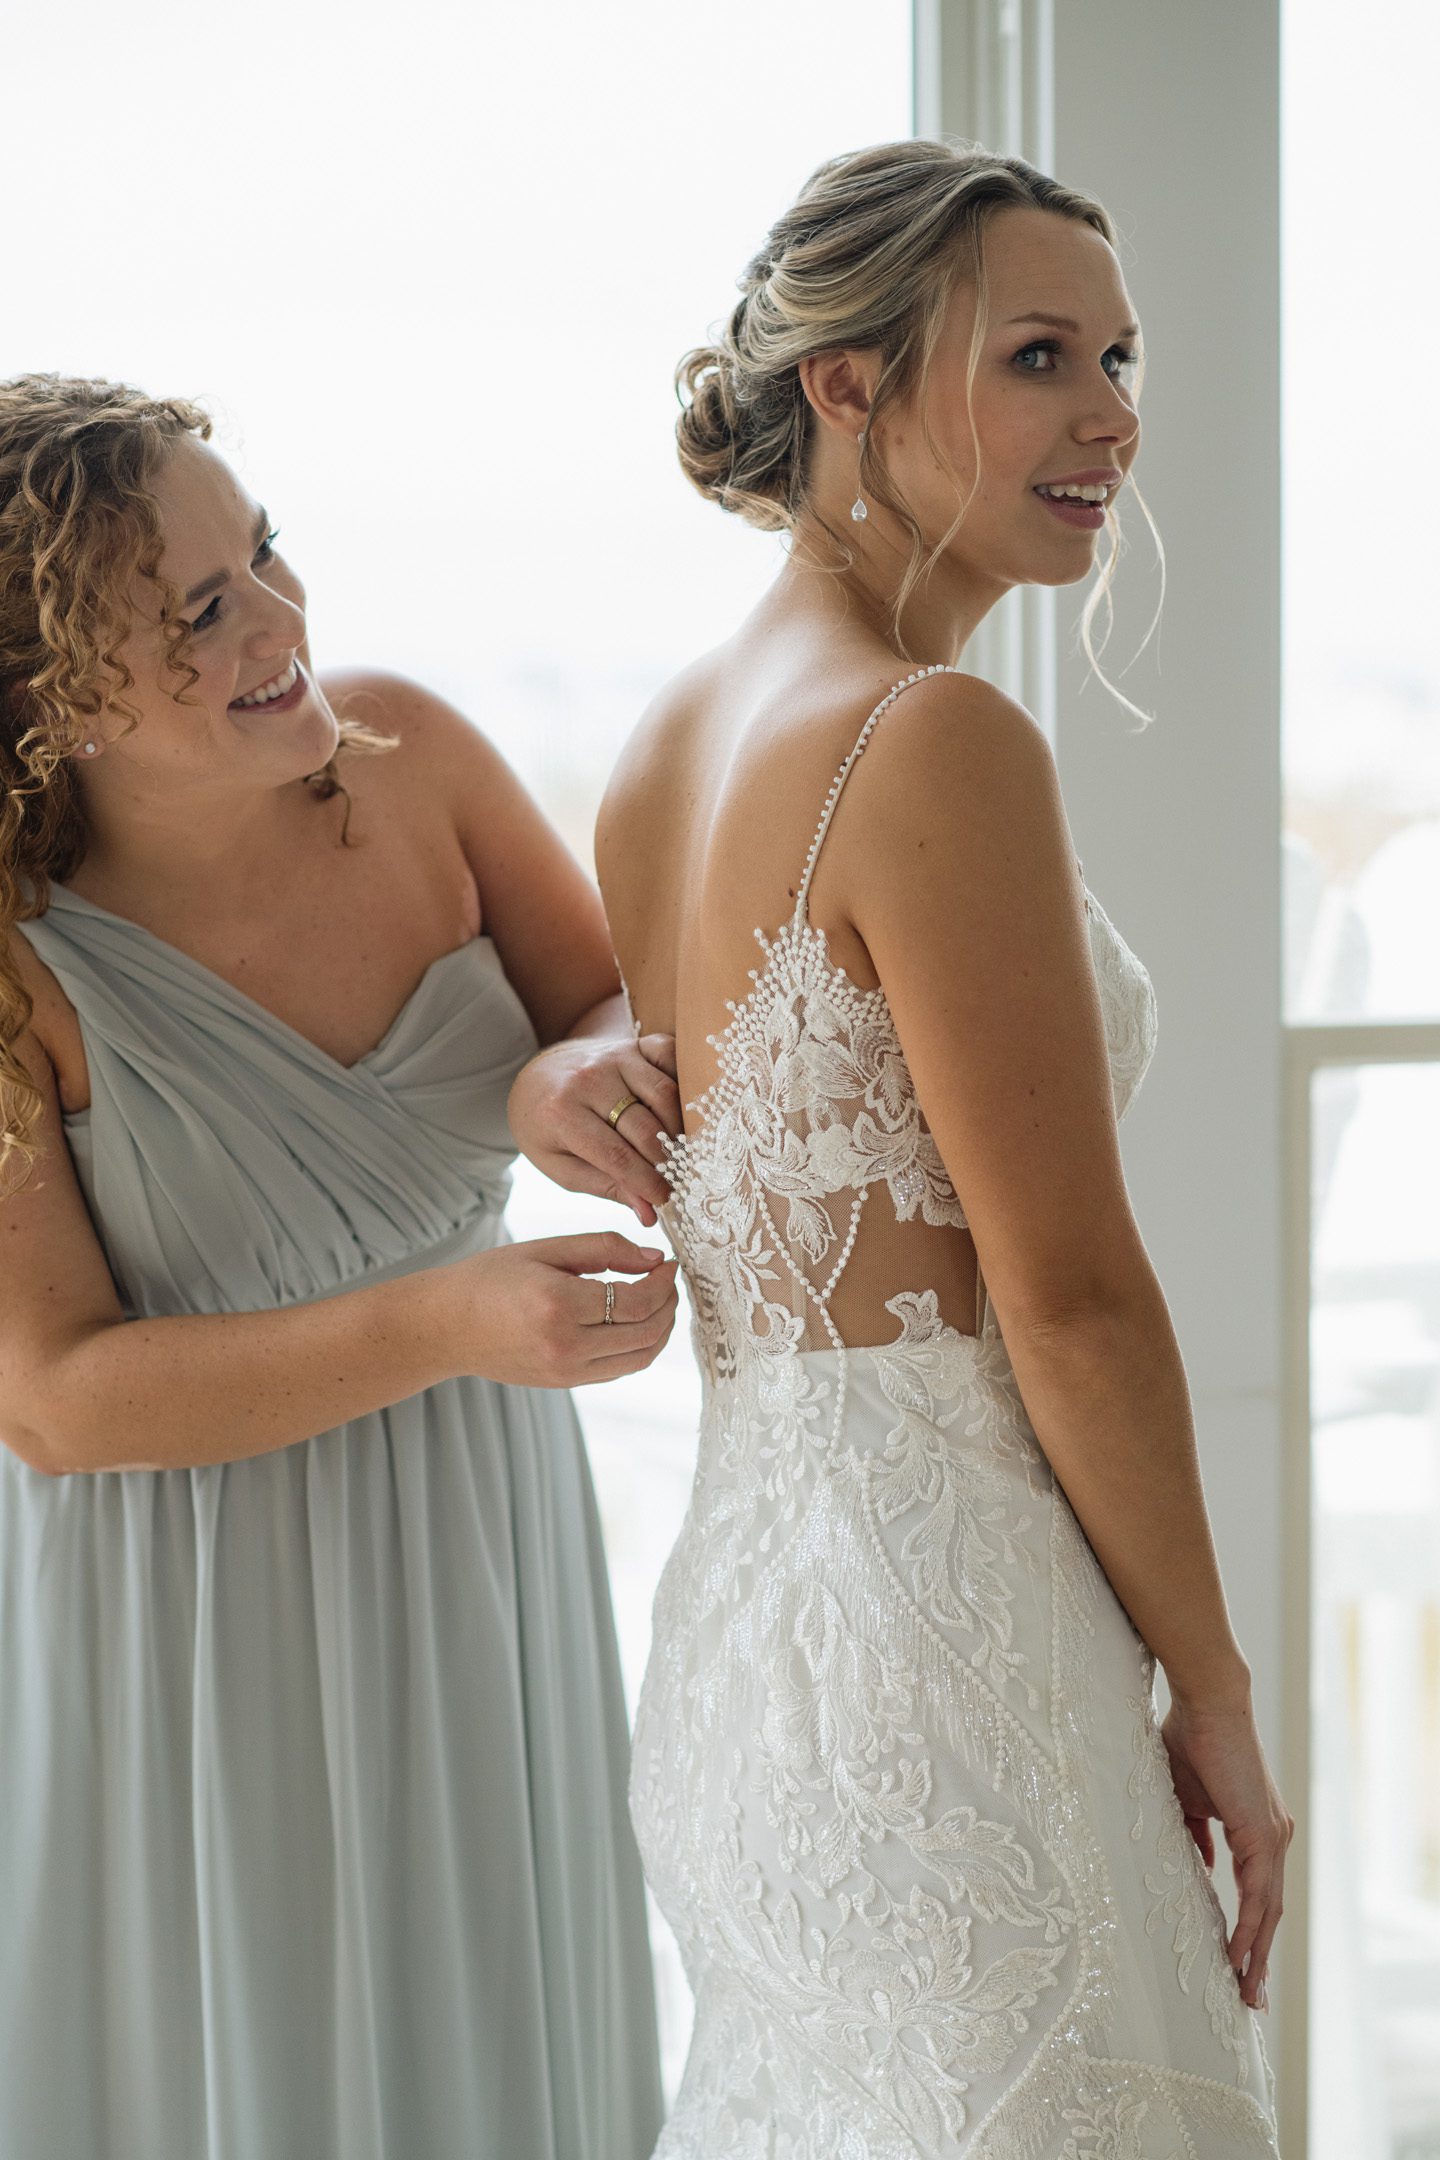 Maid of honor helping bride into her wedding dress